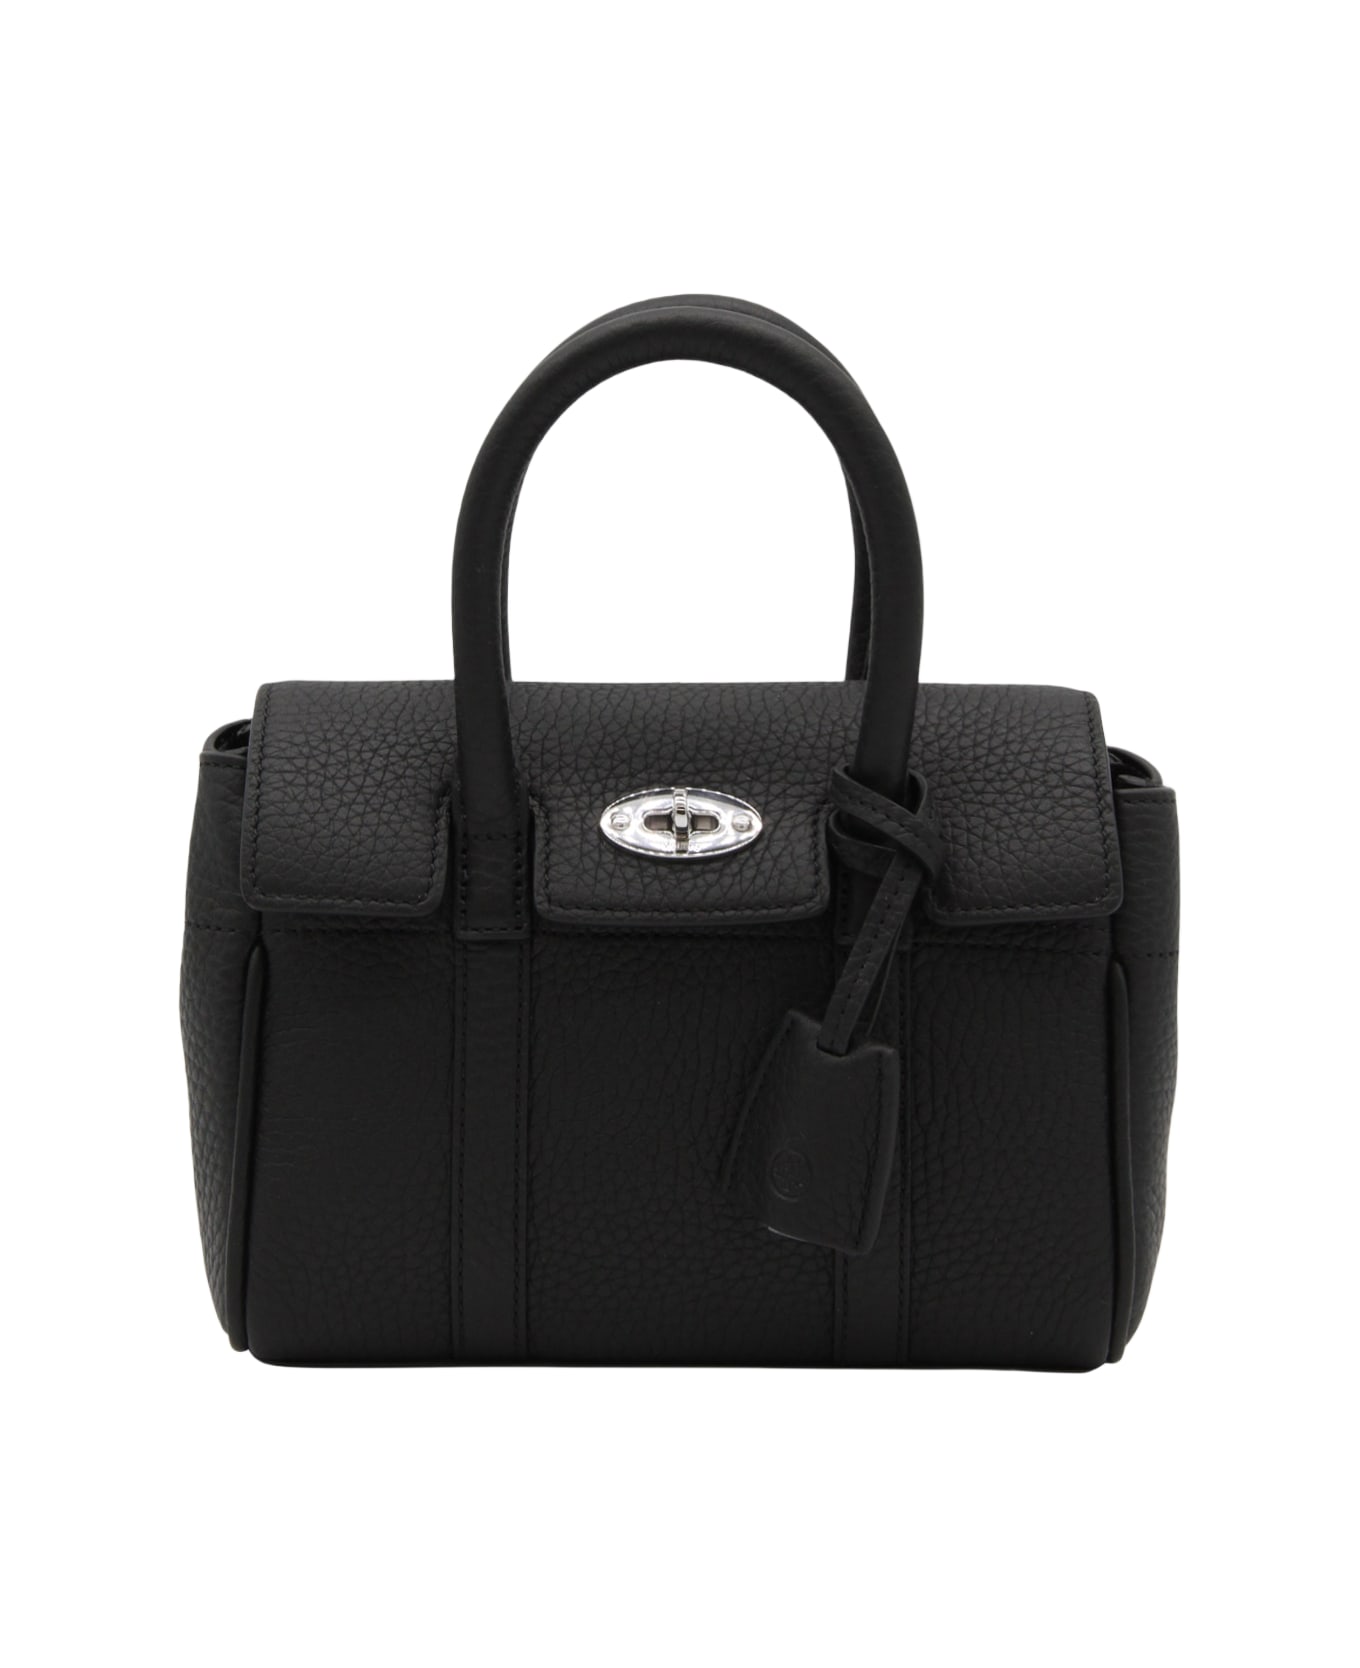 Mulberry Black Leather Mini Bayswater Heavy Top Handle Bag - Black